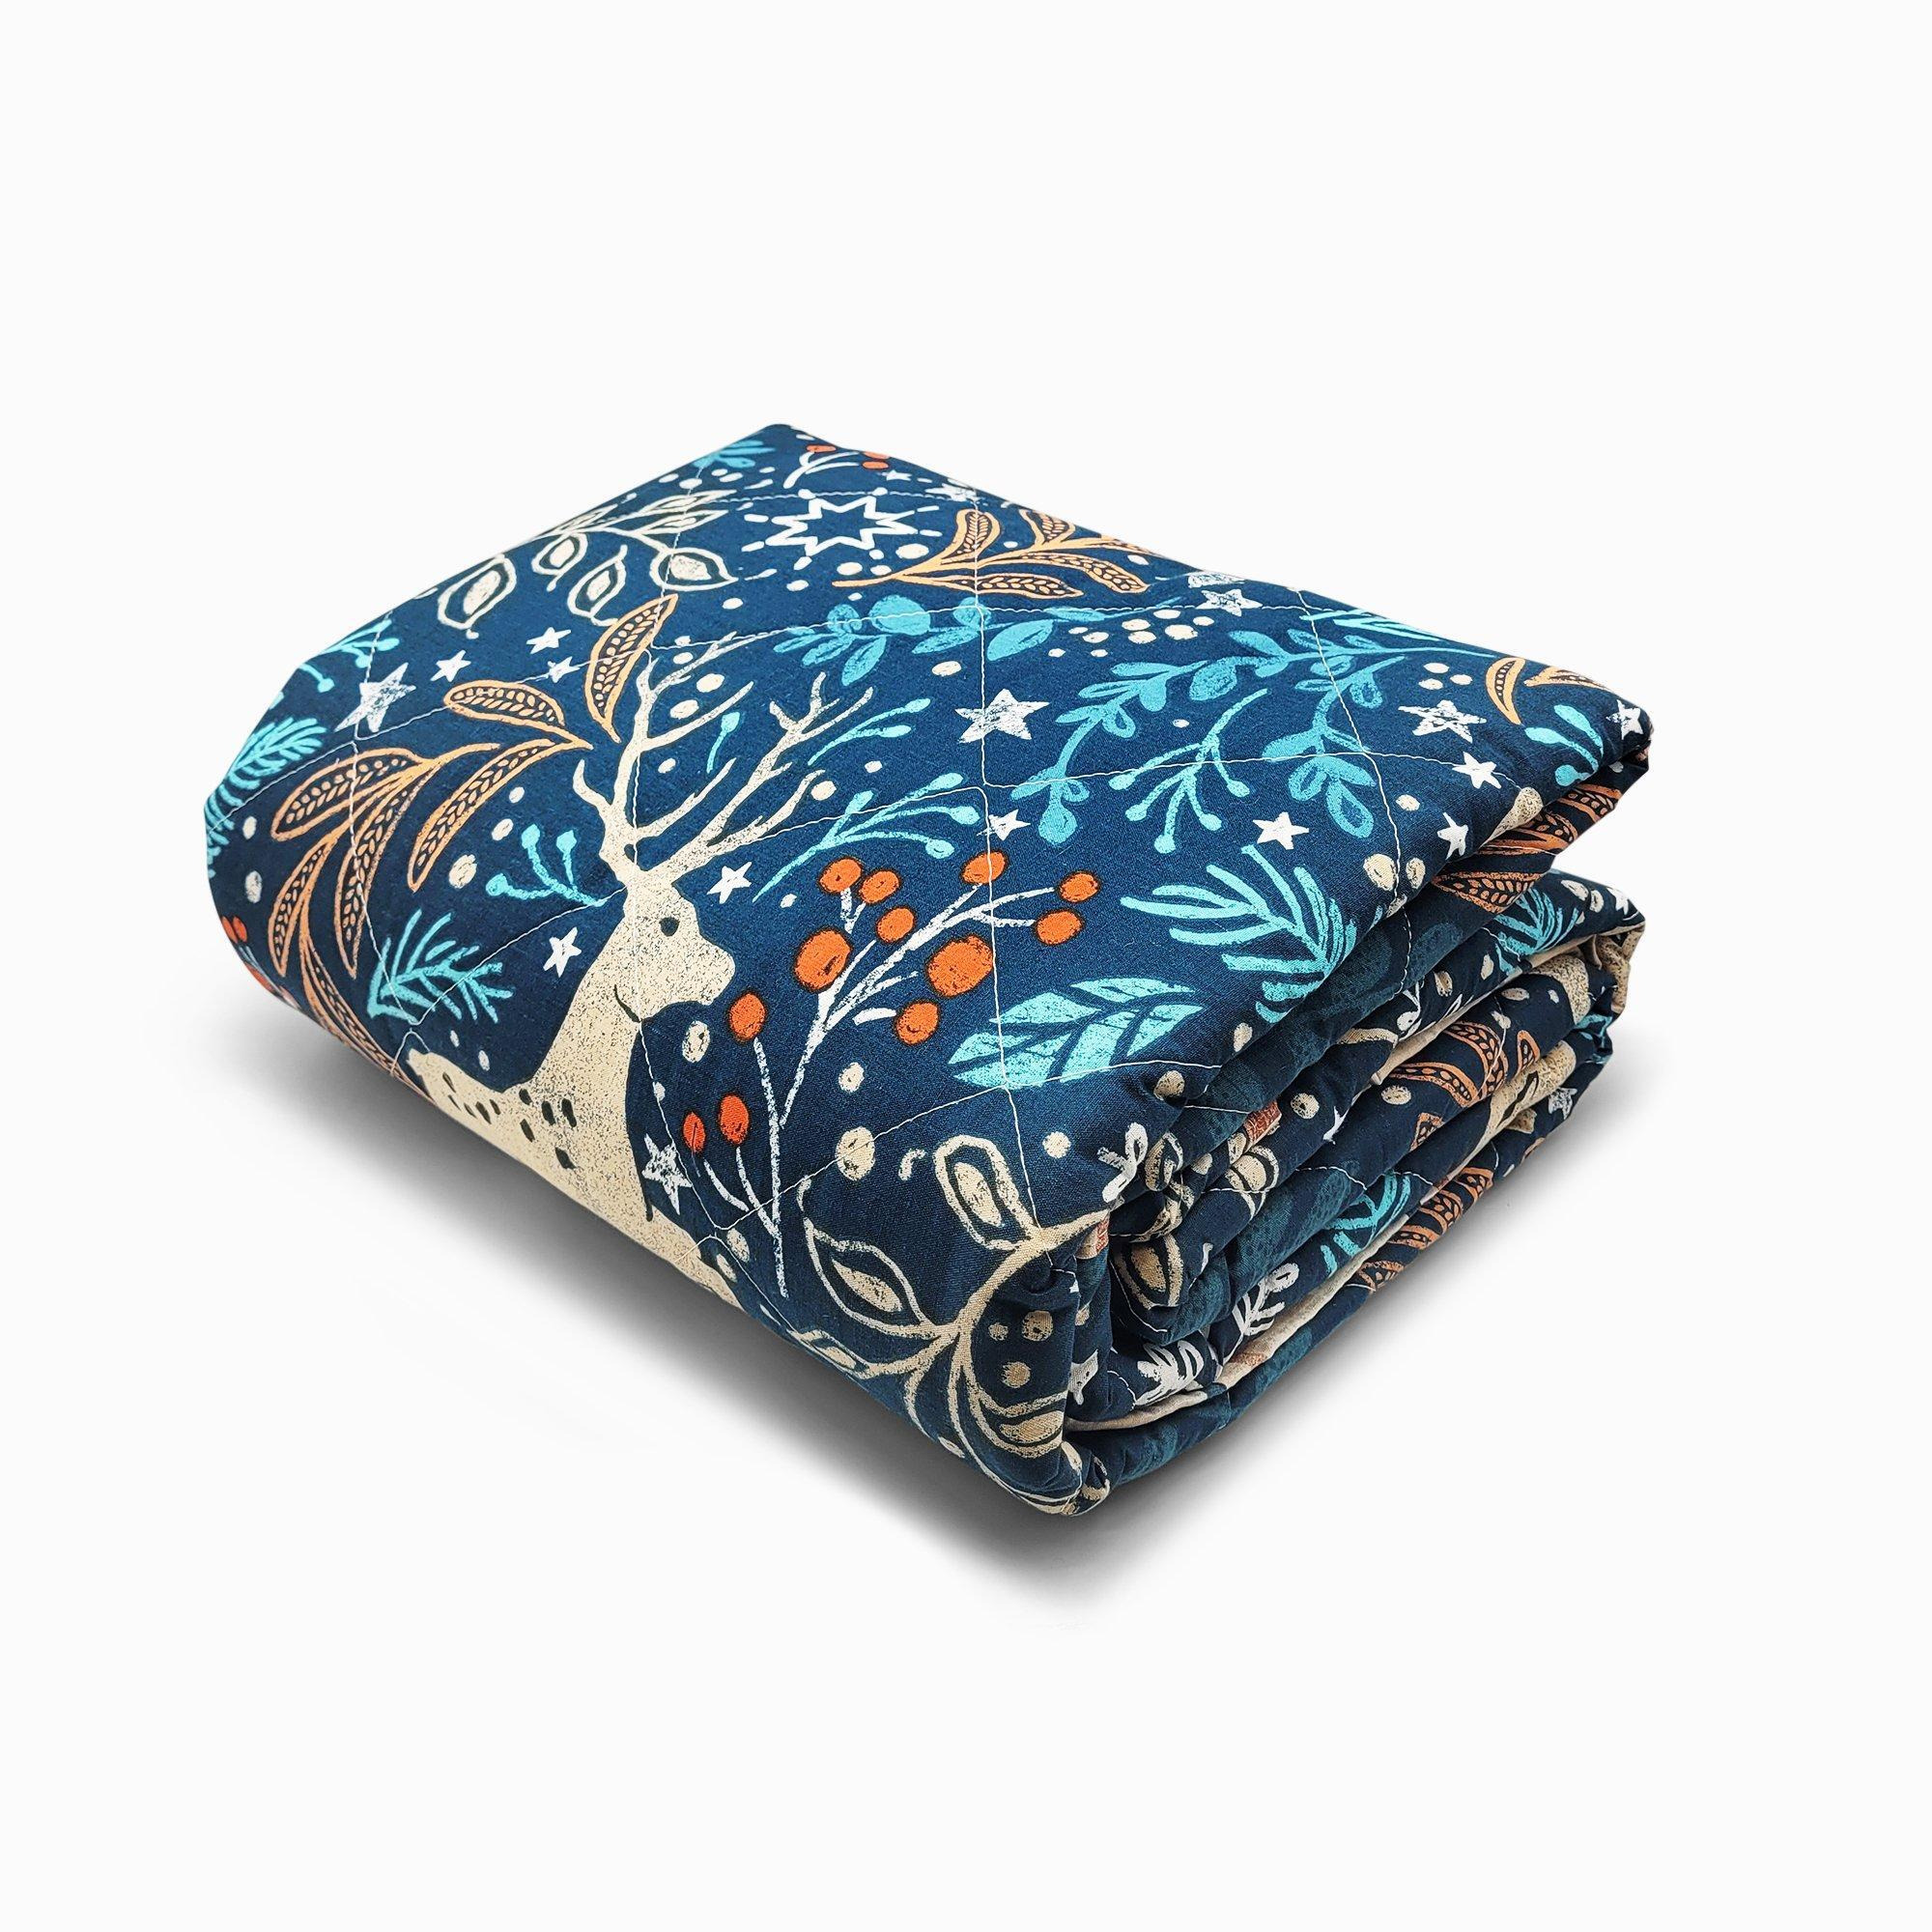 Winter Stags Reversible Quilted Throw Throwover Blanket - image 1